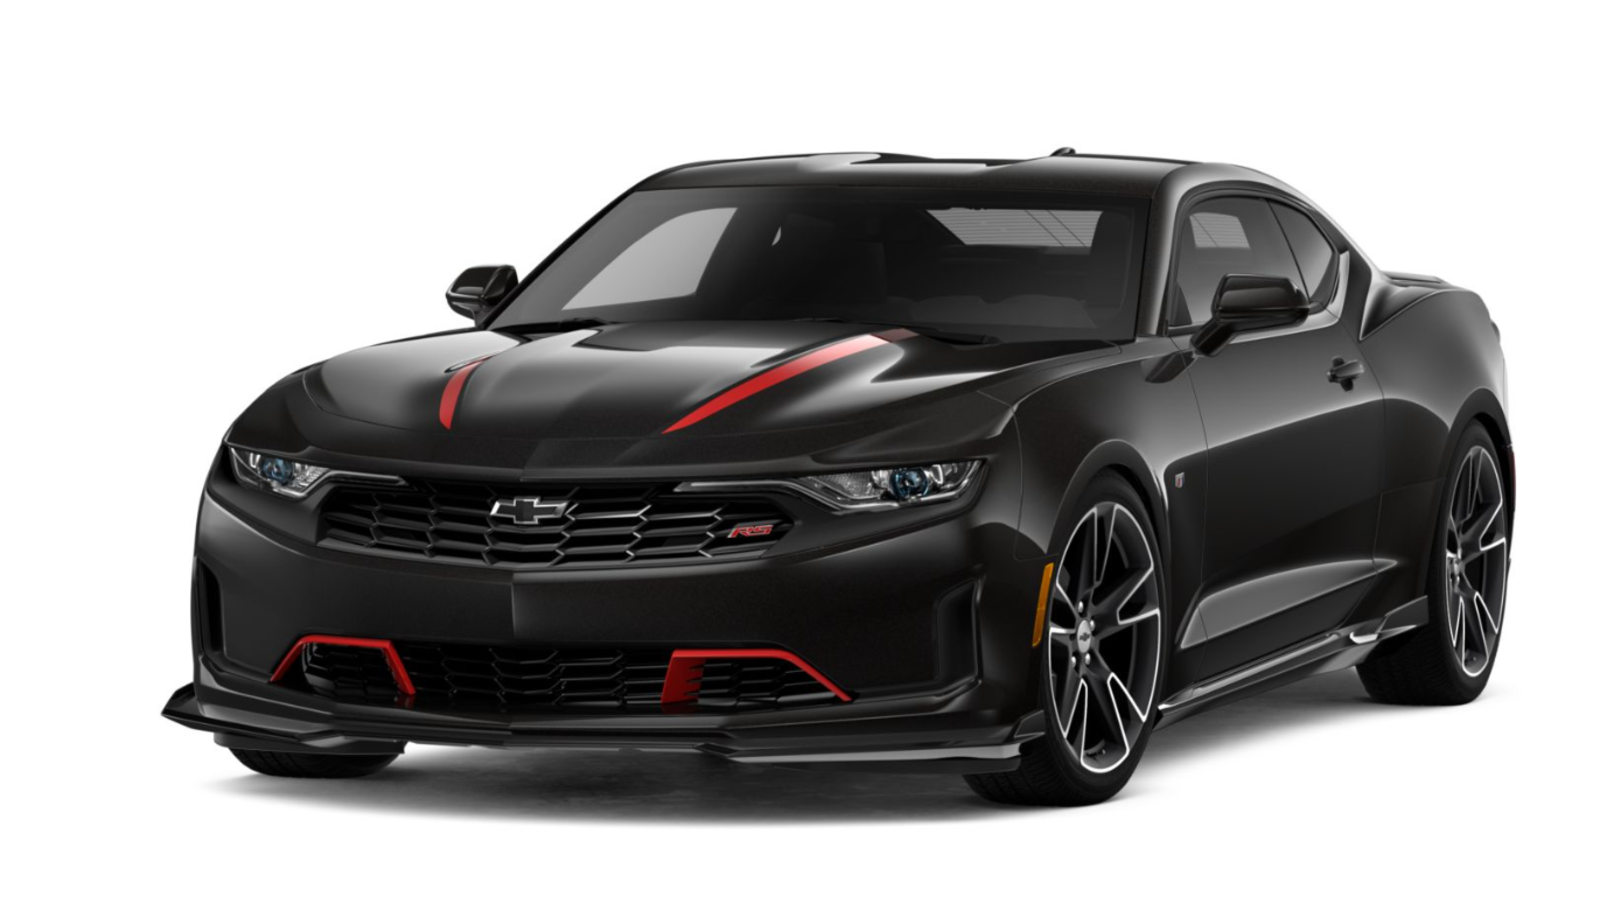 Illustration for article titled Seent - gross way to spend $3,575 in options on a Camaro.